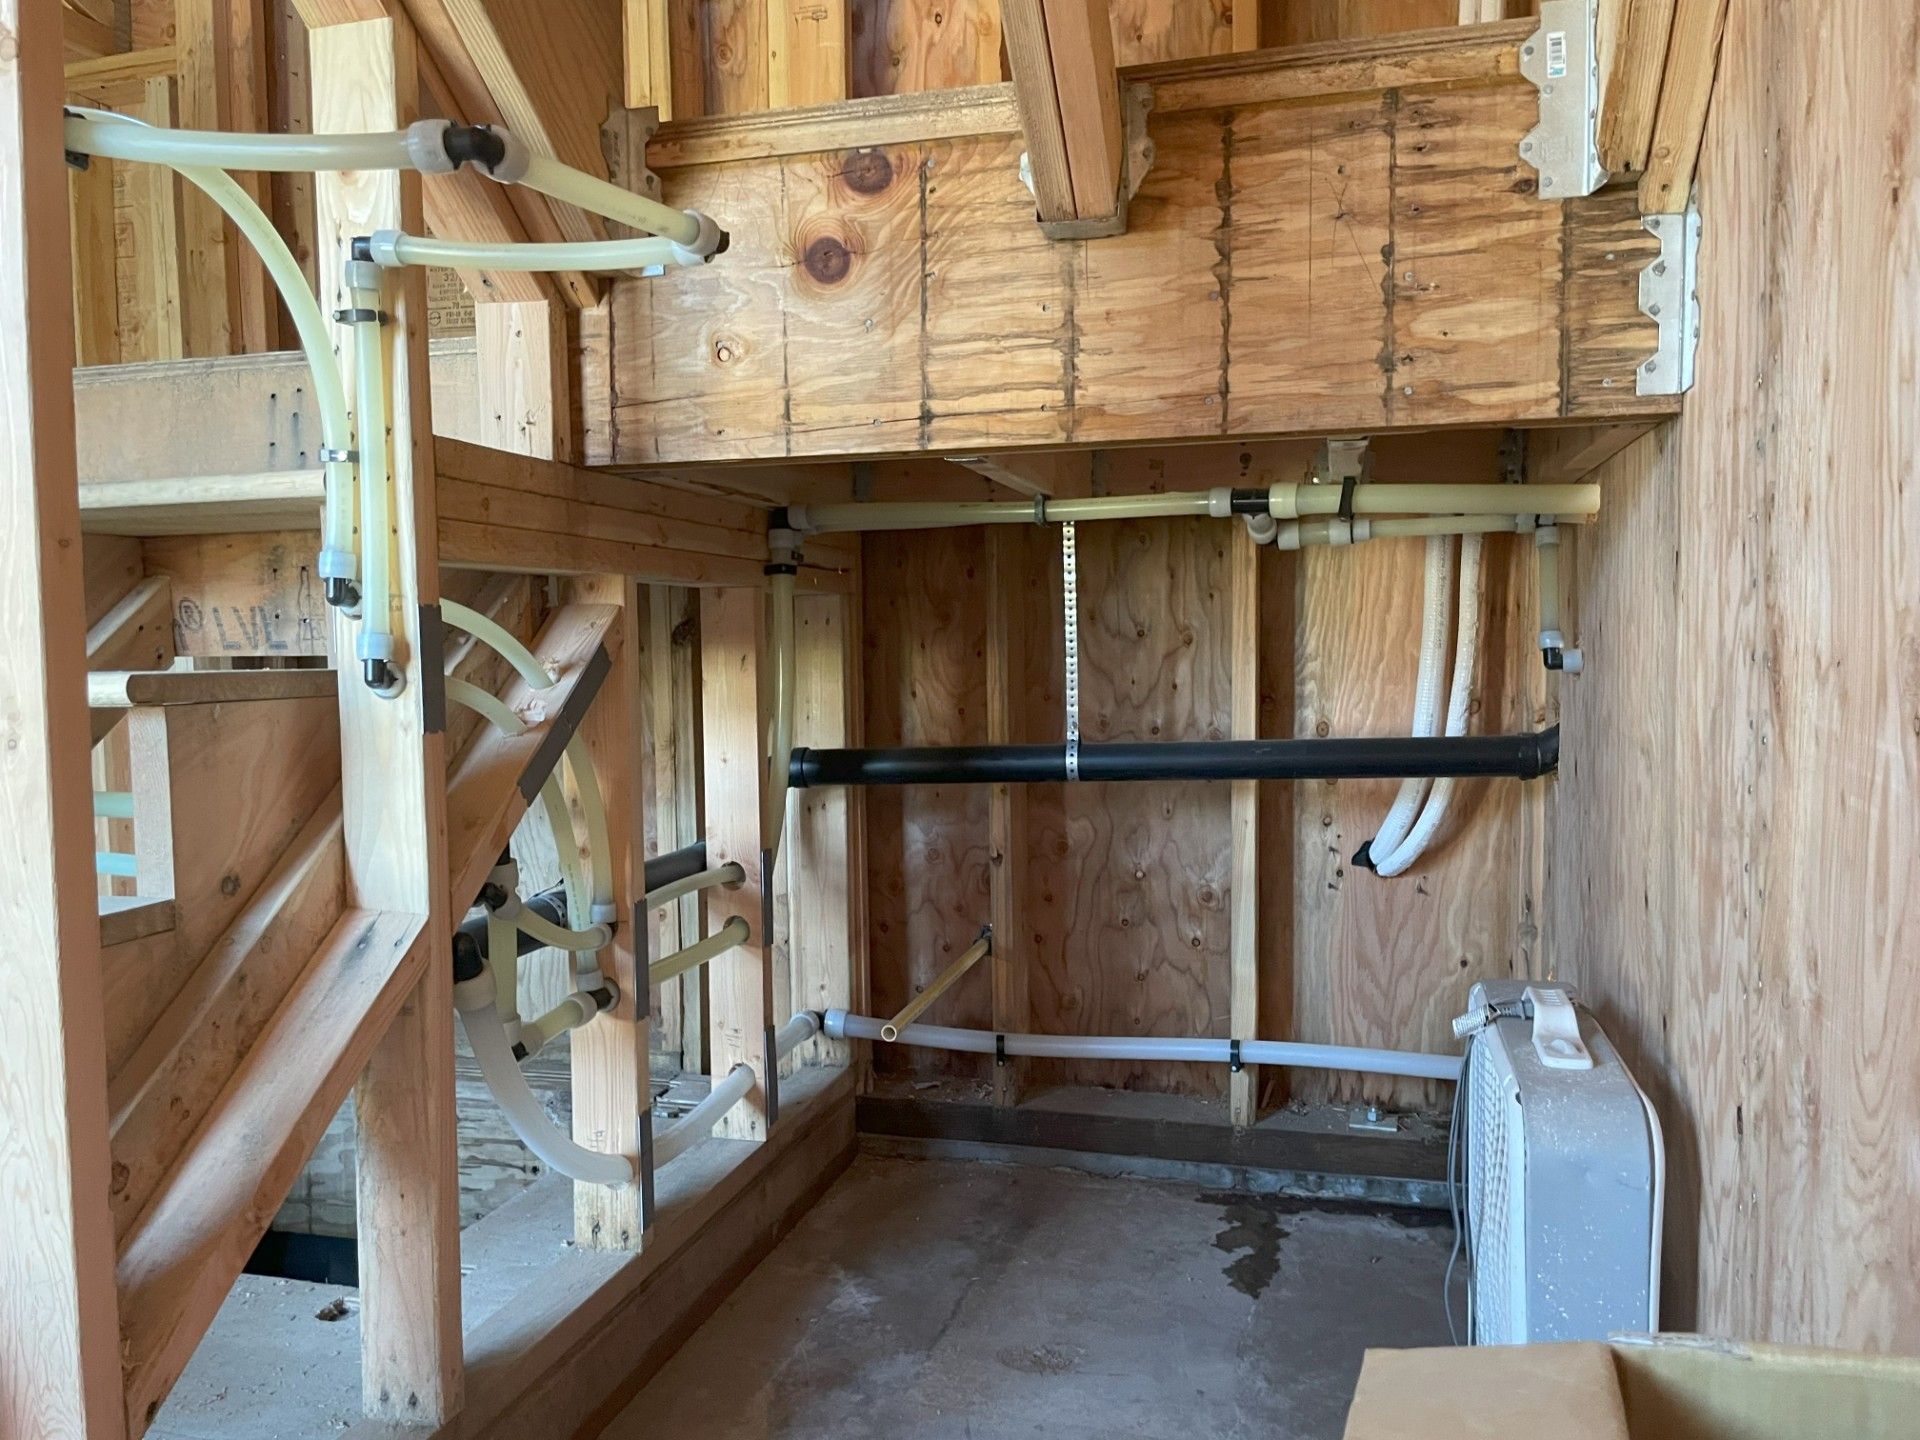 A room with a lot of drainage and plumbing pipes in it due to a rough in installation